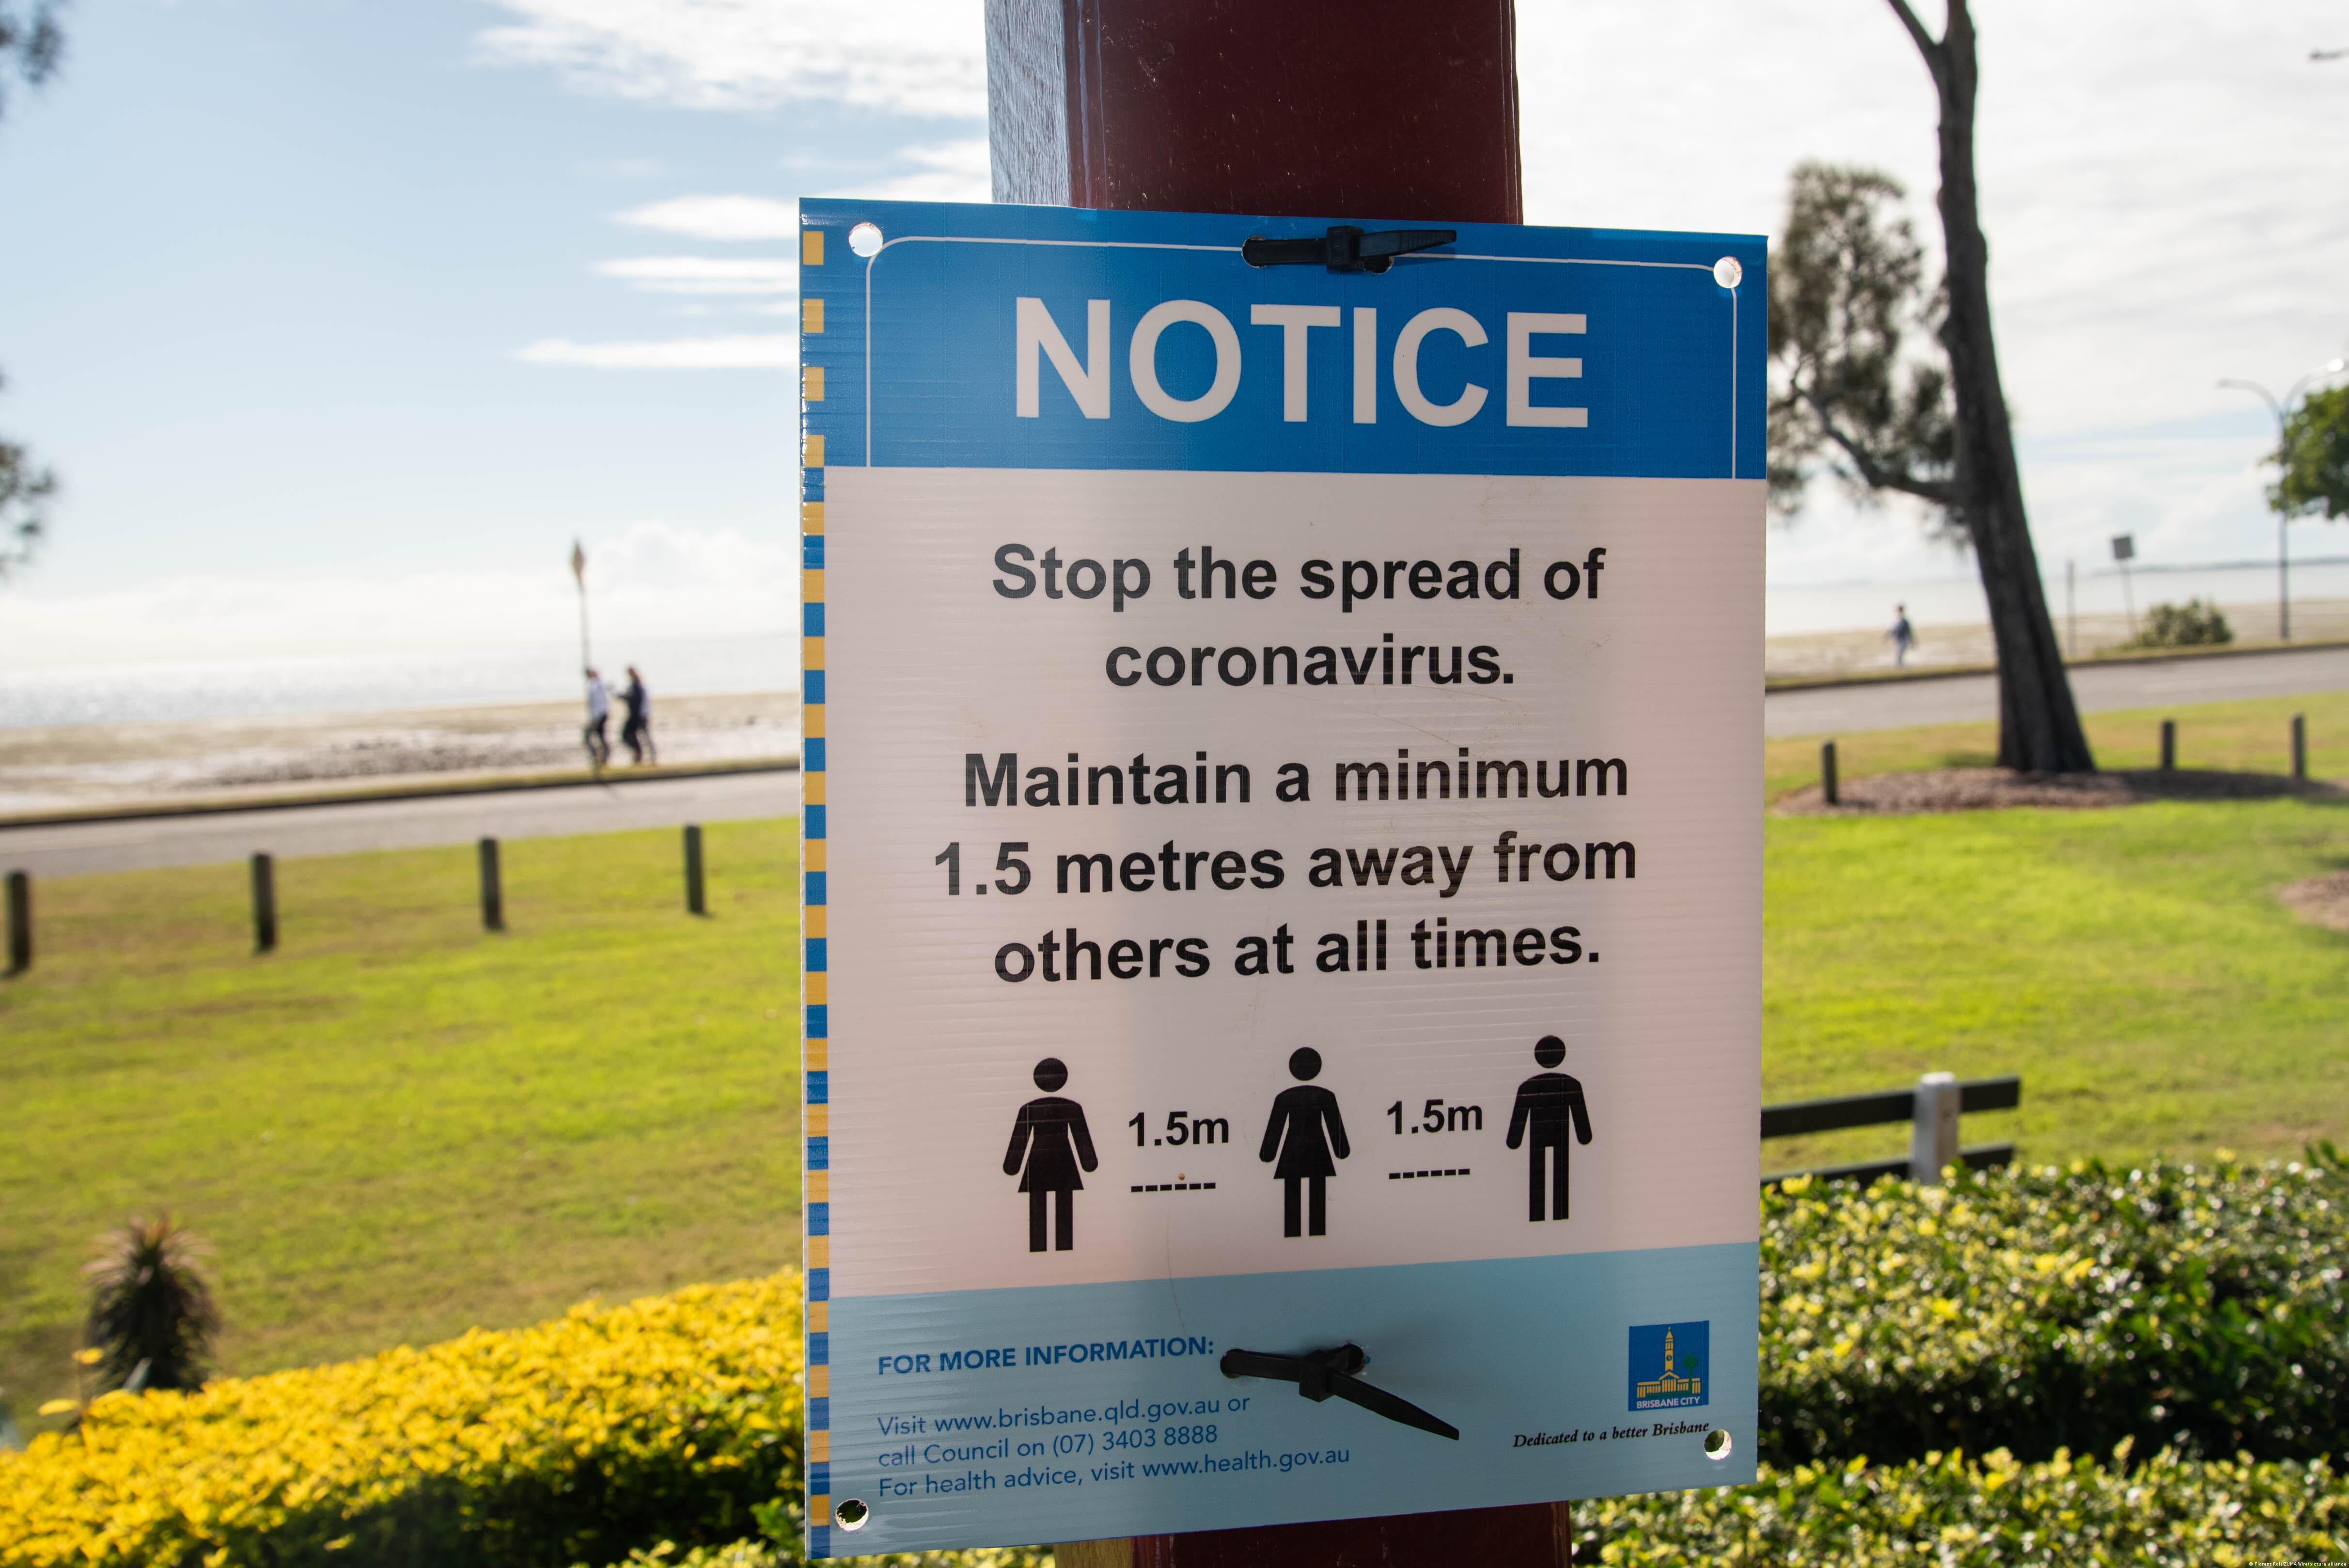 A sign in Brisbane, Australia reminds the public about social distancing 